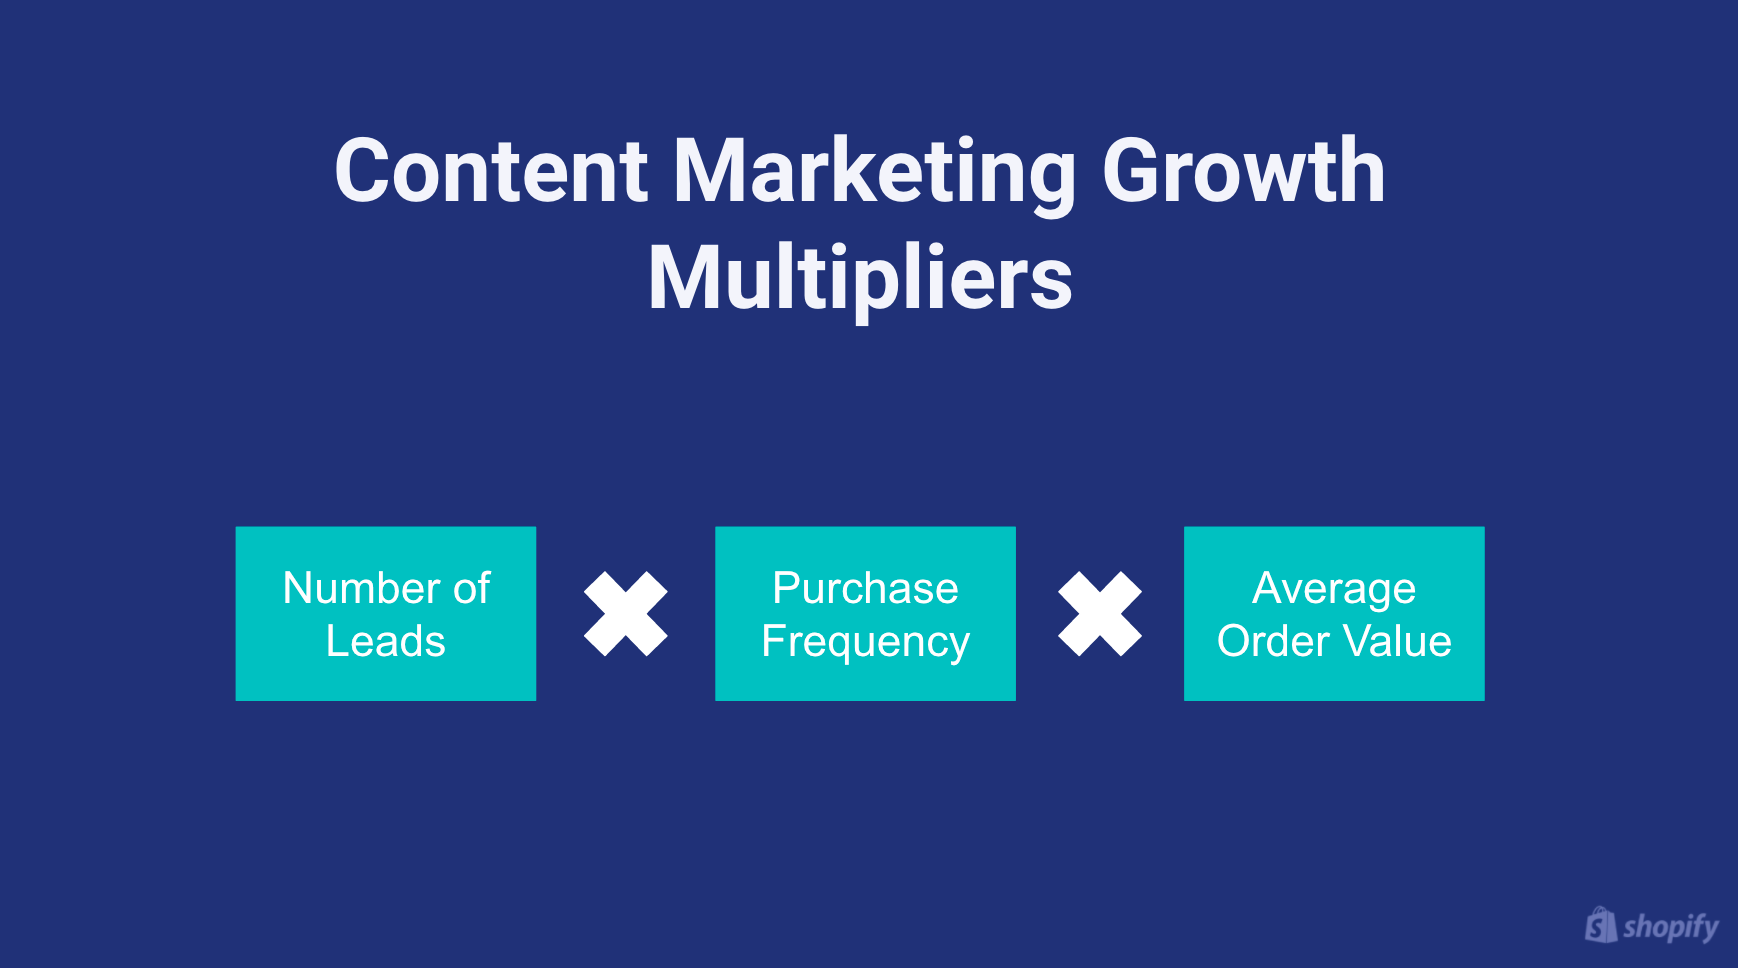 Content marketing growth multipliers